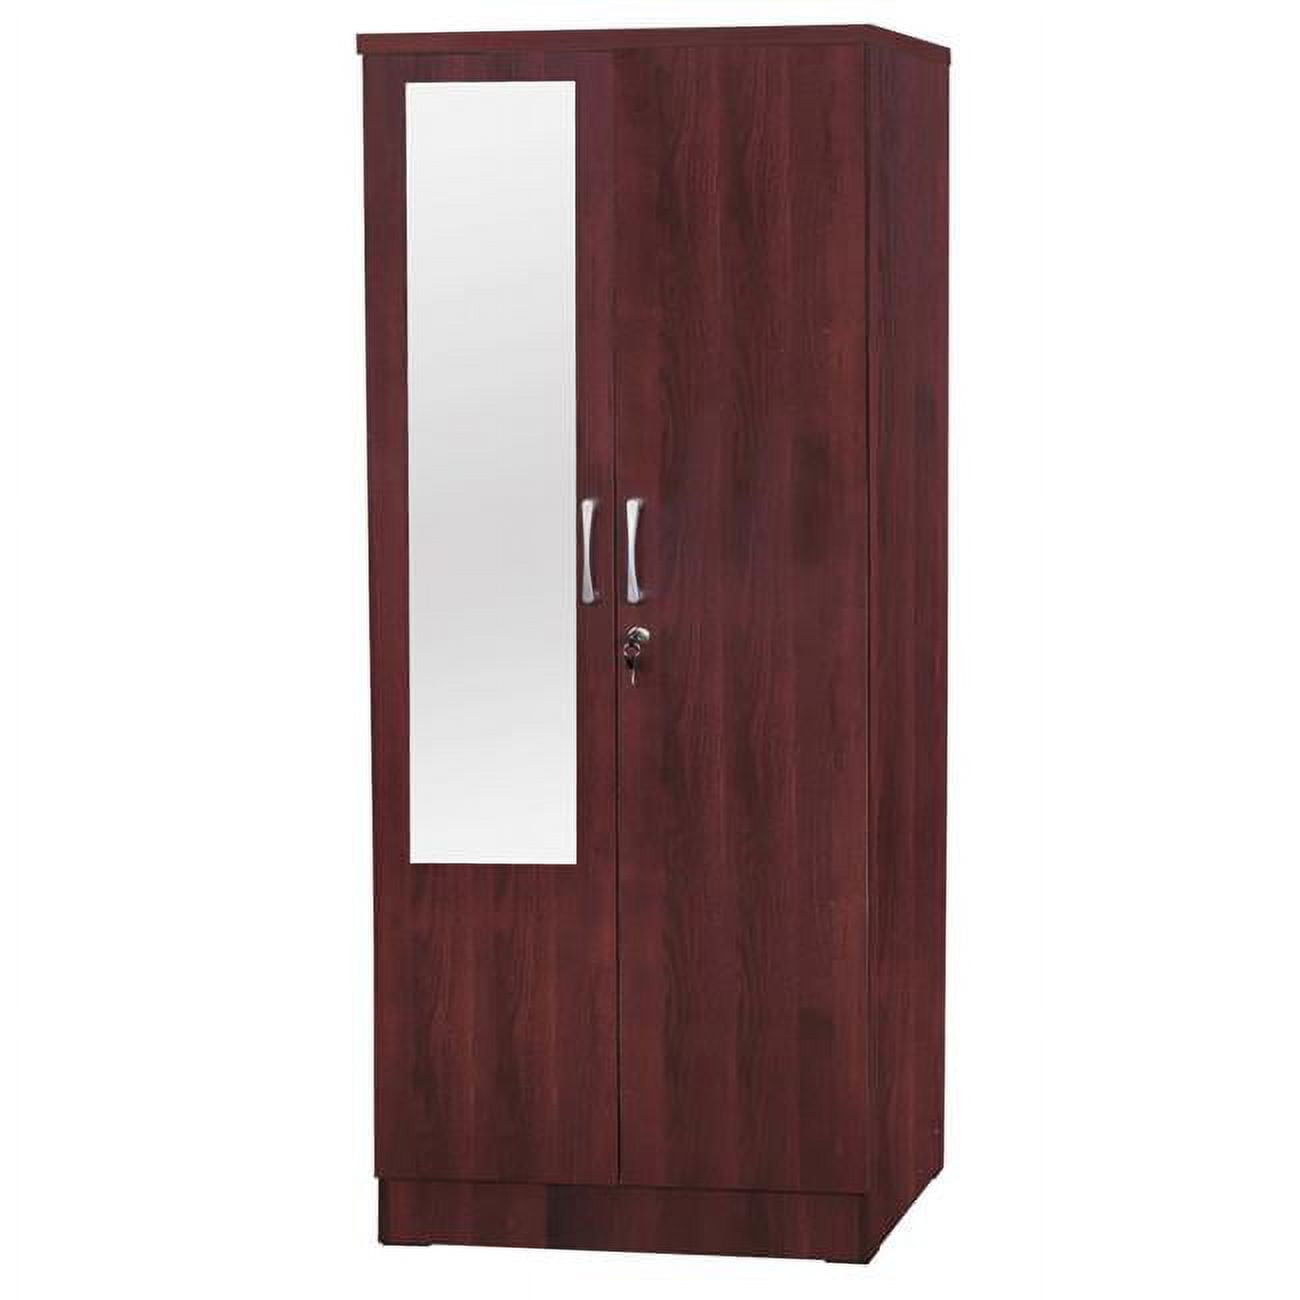 Picture of Better Home Products NW104-M-MAH Harmony Two Door Armoire Wardrobe Cabinet with Mirror, Mahogany